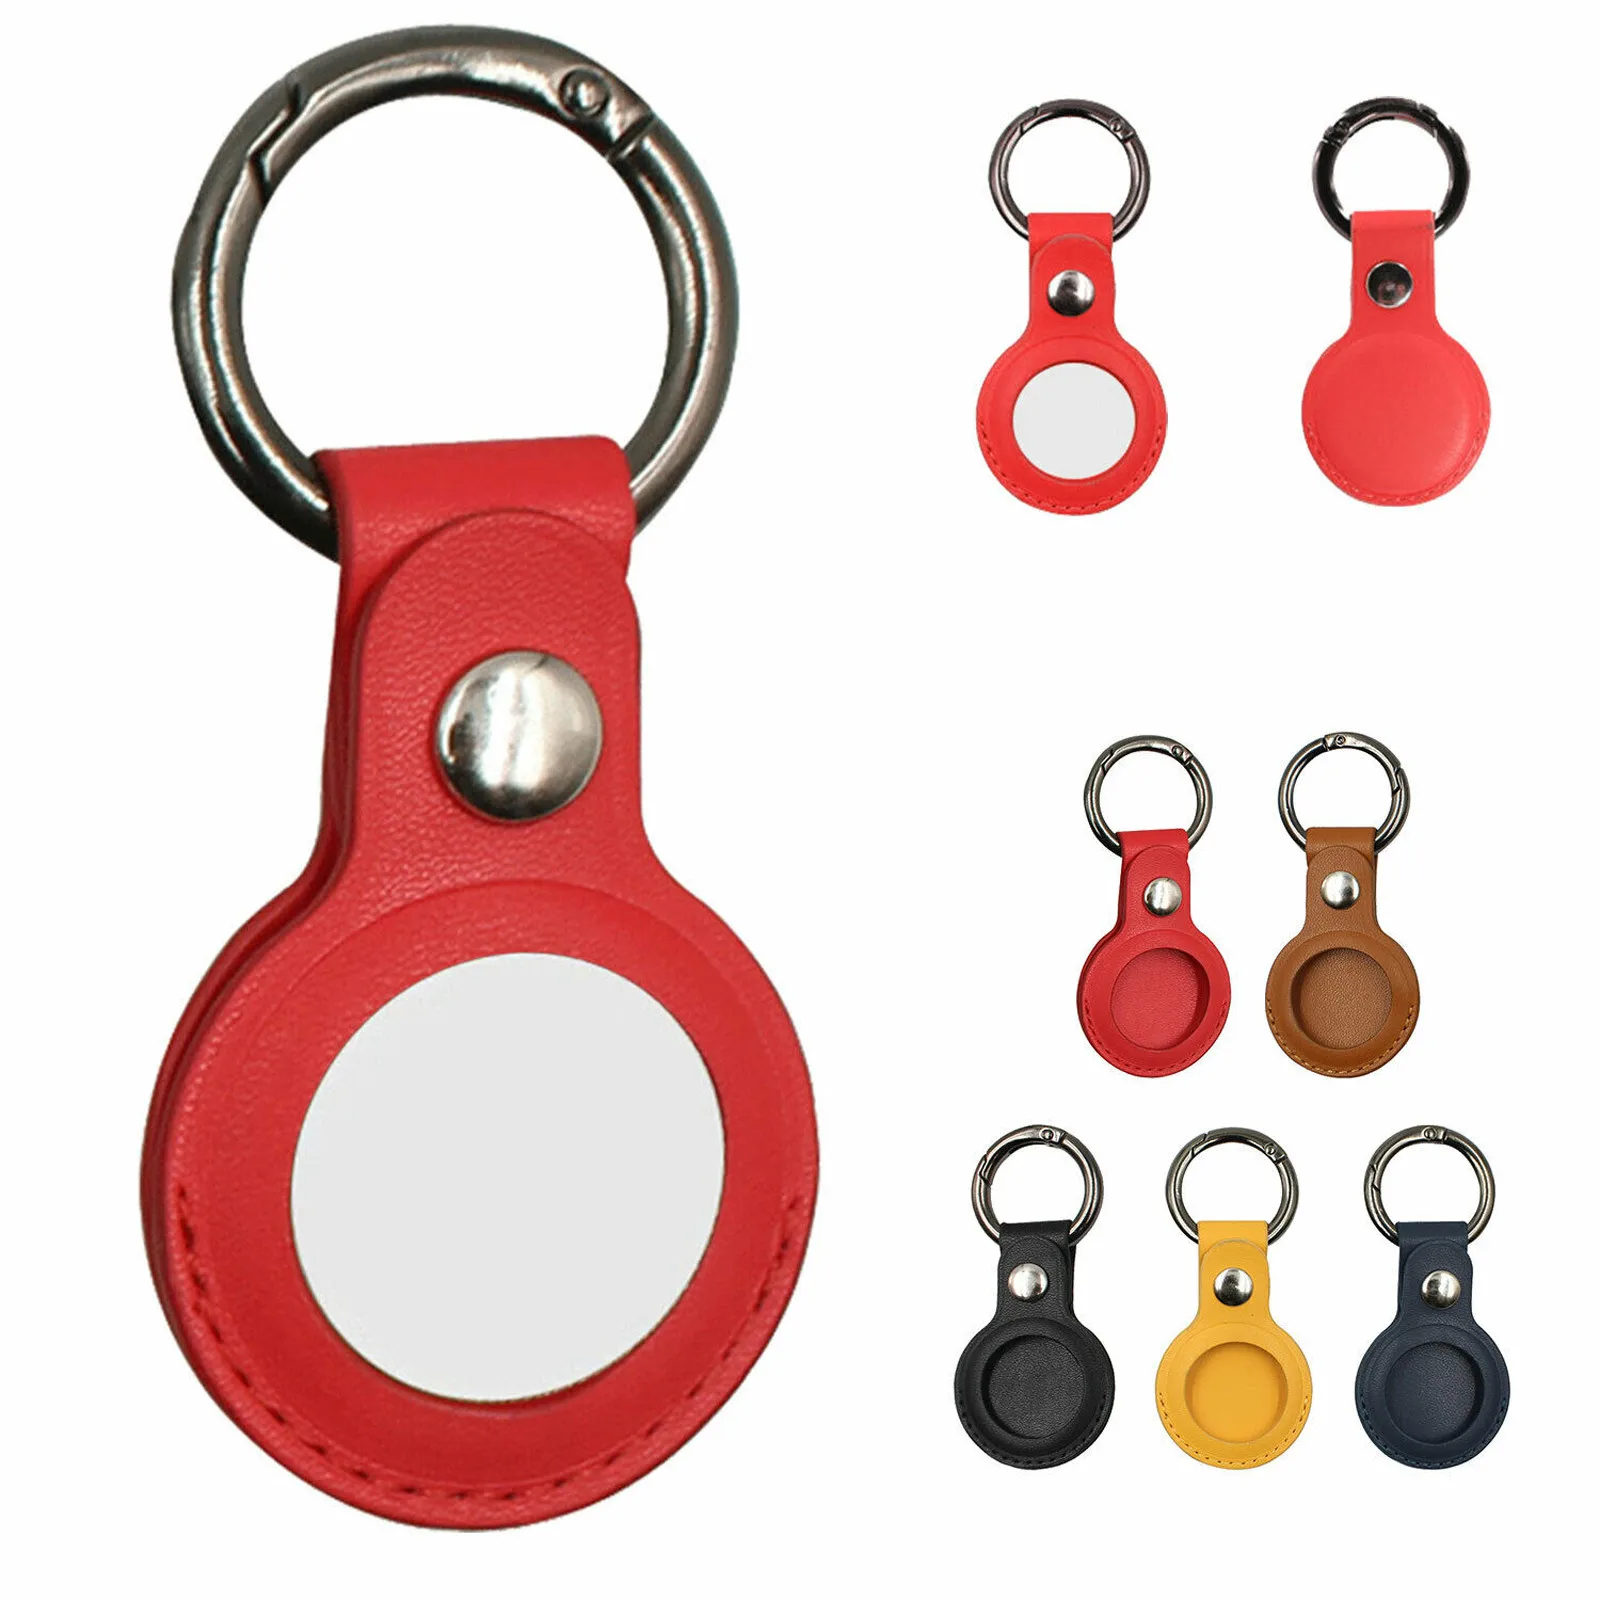 

Leather Protective Case For Airtag Cover Hangable Keychain Locator Tracker Case For Apple airtags Keychain Protective Covers